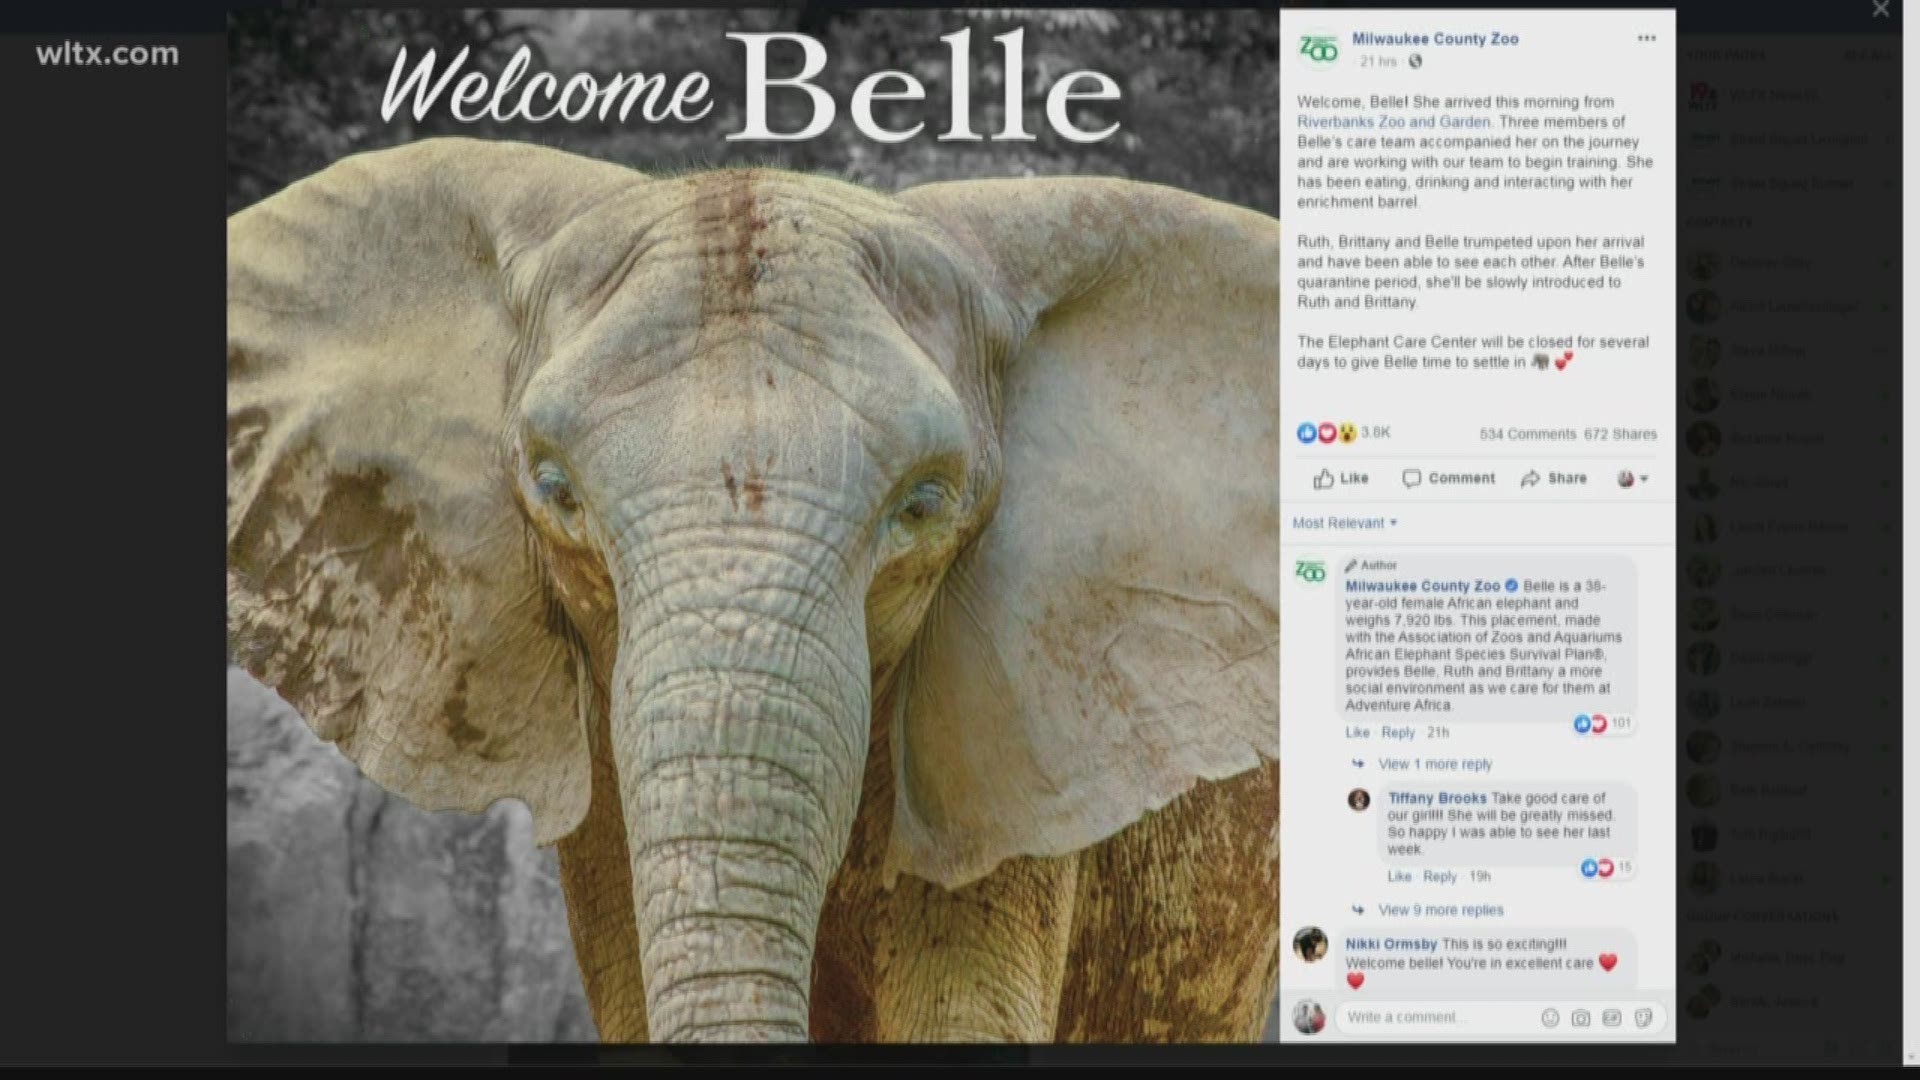 According to the post, the Elephant Care Center will be closed for several days to give Belle time to settle in.